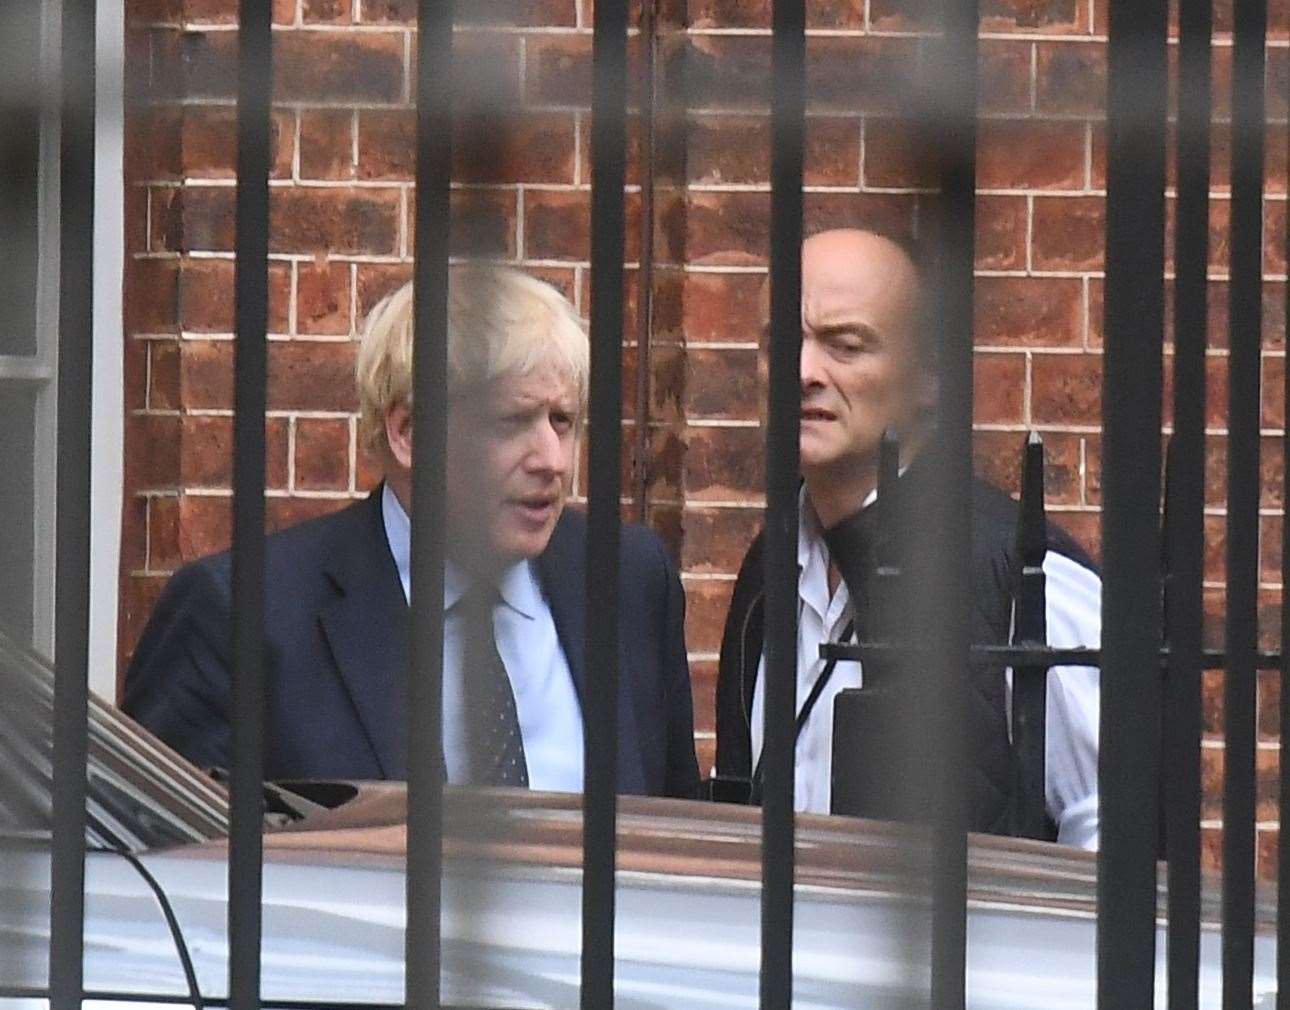 Prime Minister Boris Johnson has offered his ‘full support’ to Dominic Cummings. There had been calls for him to sack his top aide (Victoria Jones/PA)